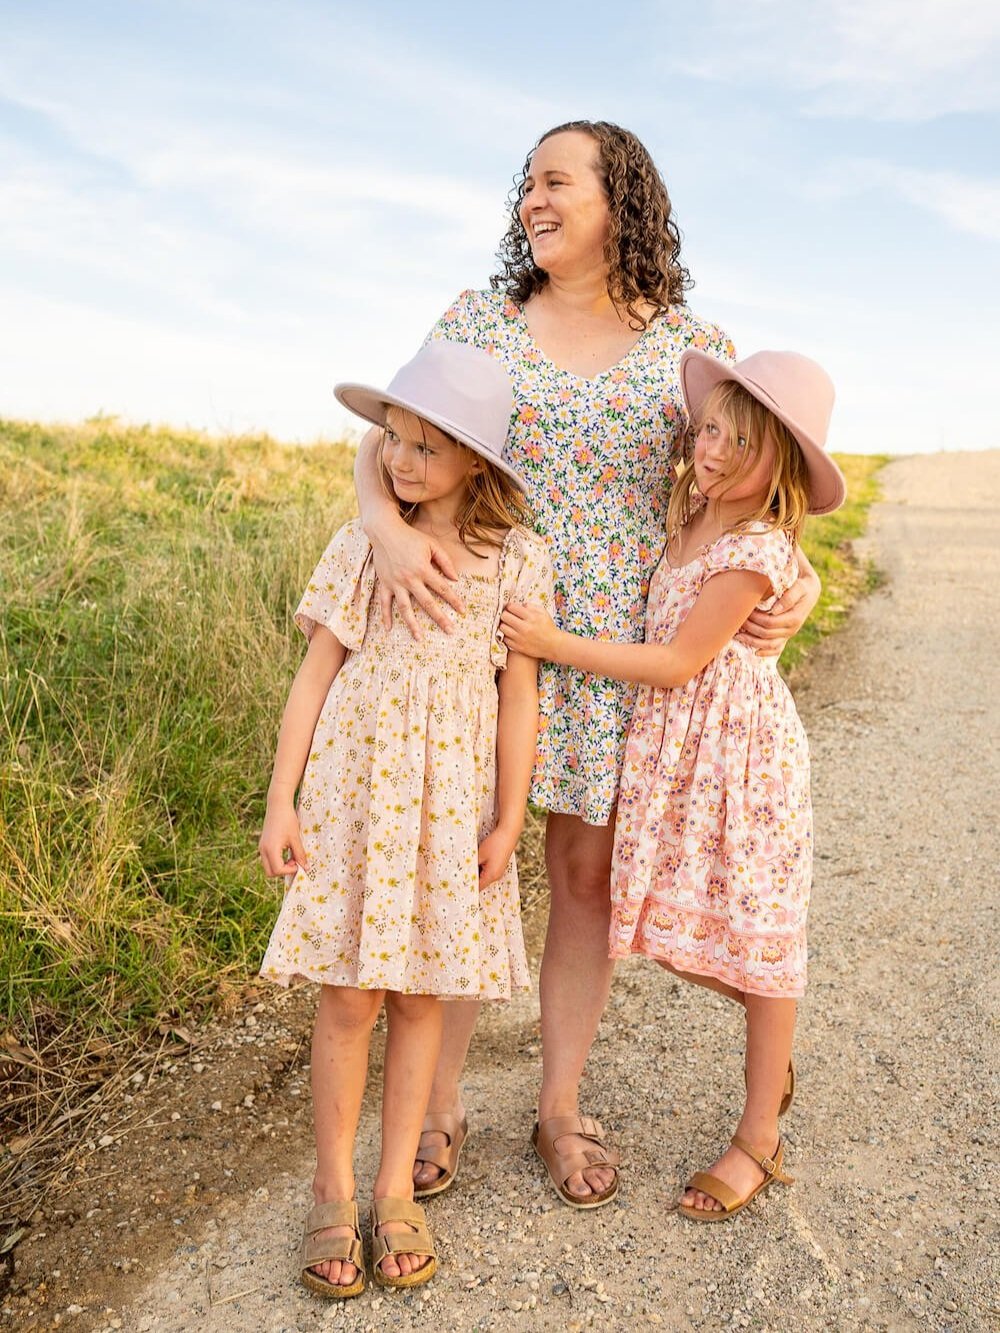 A mother and her two daughters in nature  – image captured by Sunday Muse Studio